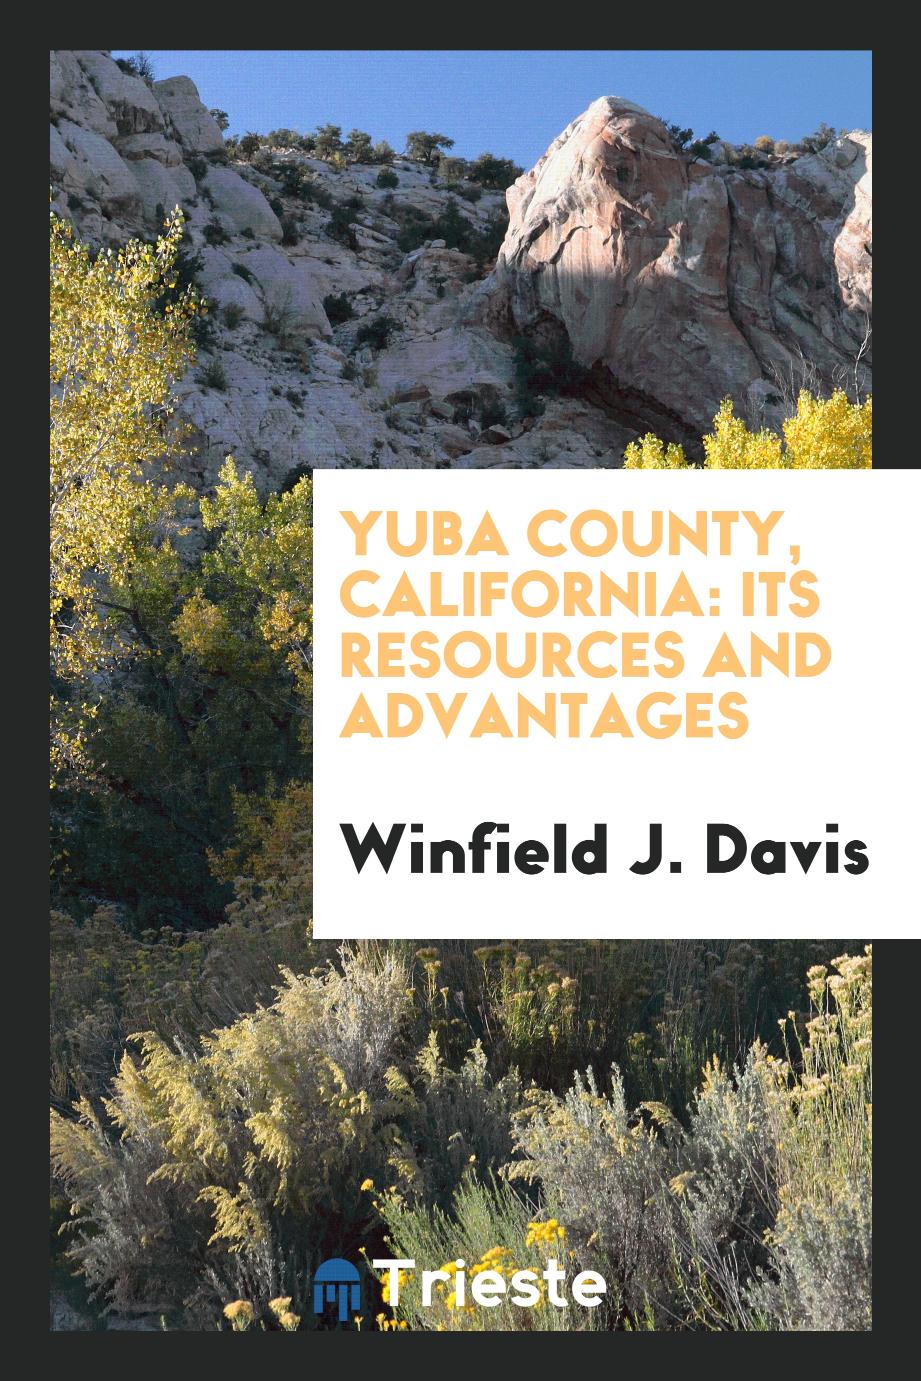 Yuba County, California: Its Resources and Advantages